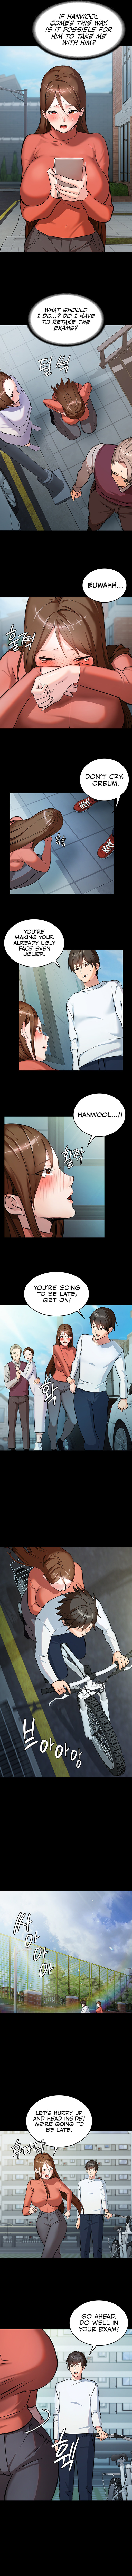 The Girl Next Door - Chapter 2 Page 6